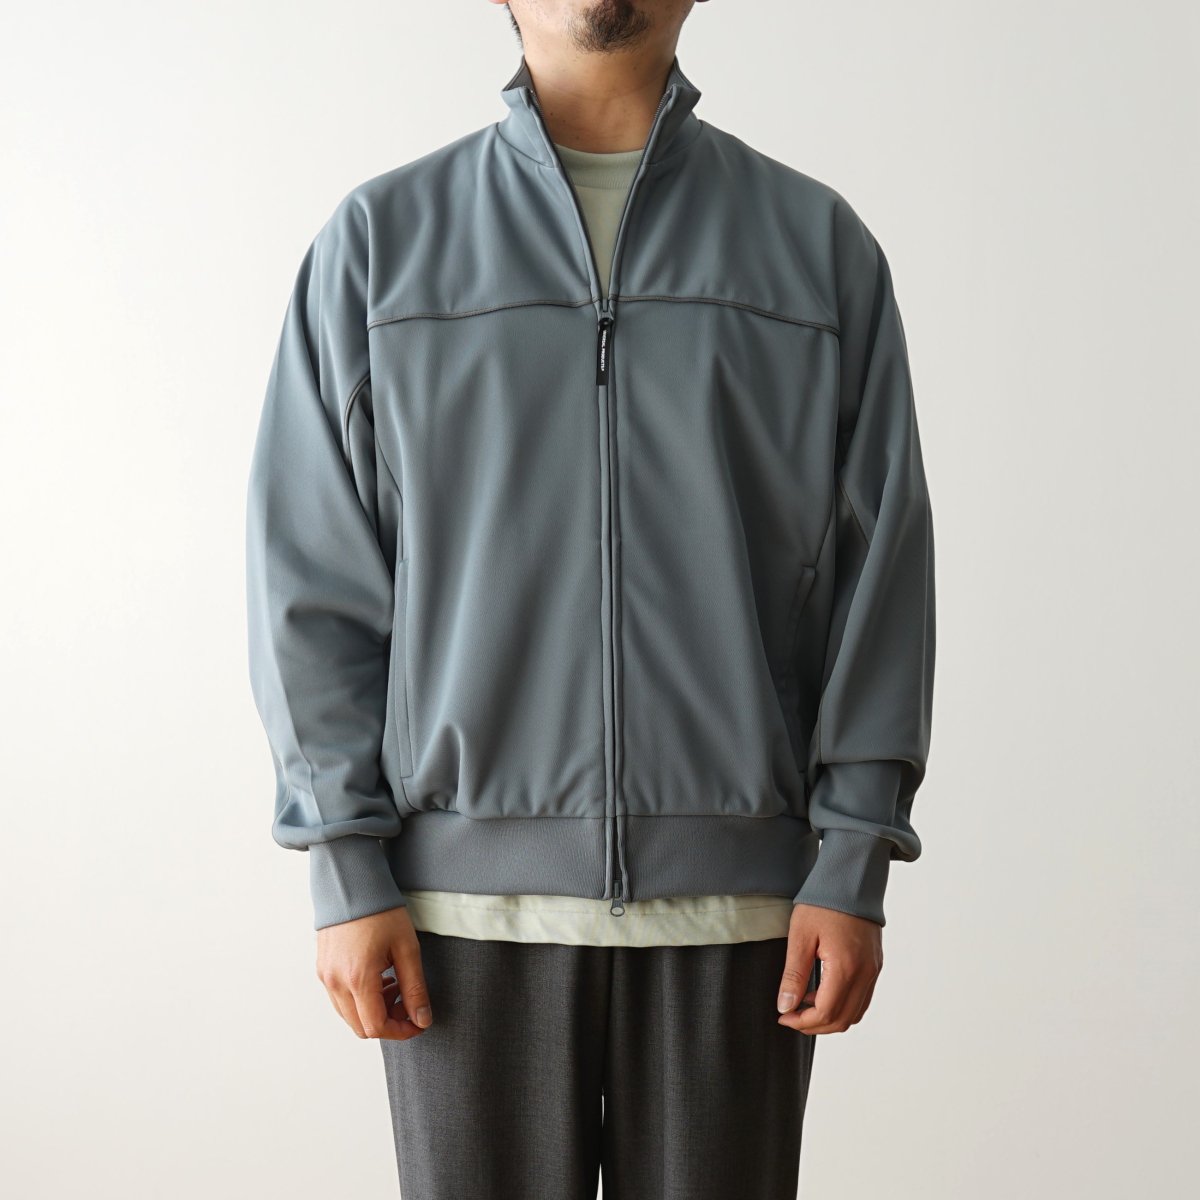 【UNIVERSAL PRODUCTS ユニバーサルプロダクツ】 TECH TRAINING TRACK JACKET - BLUE GRAY /  PARK ONLINE STORE